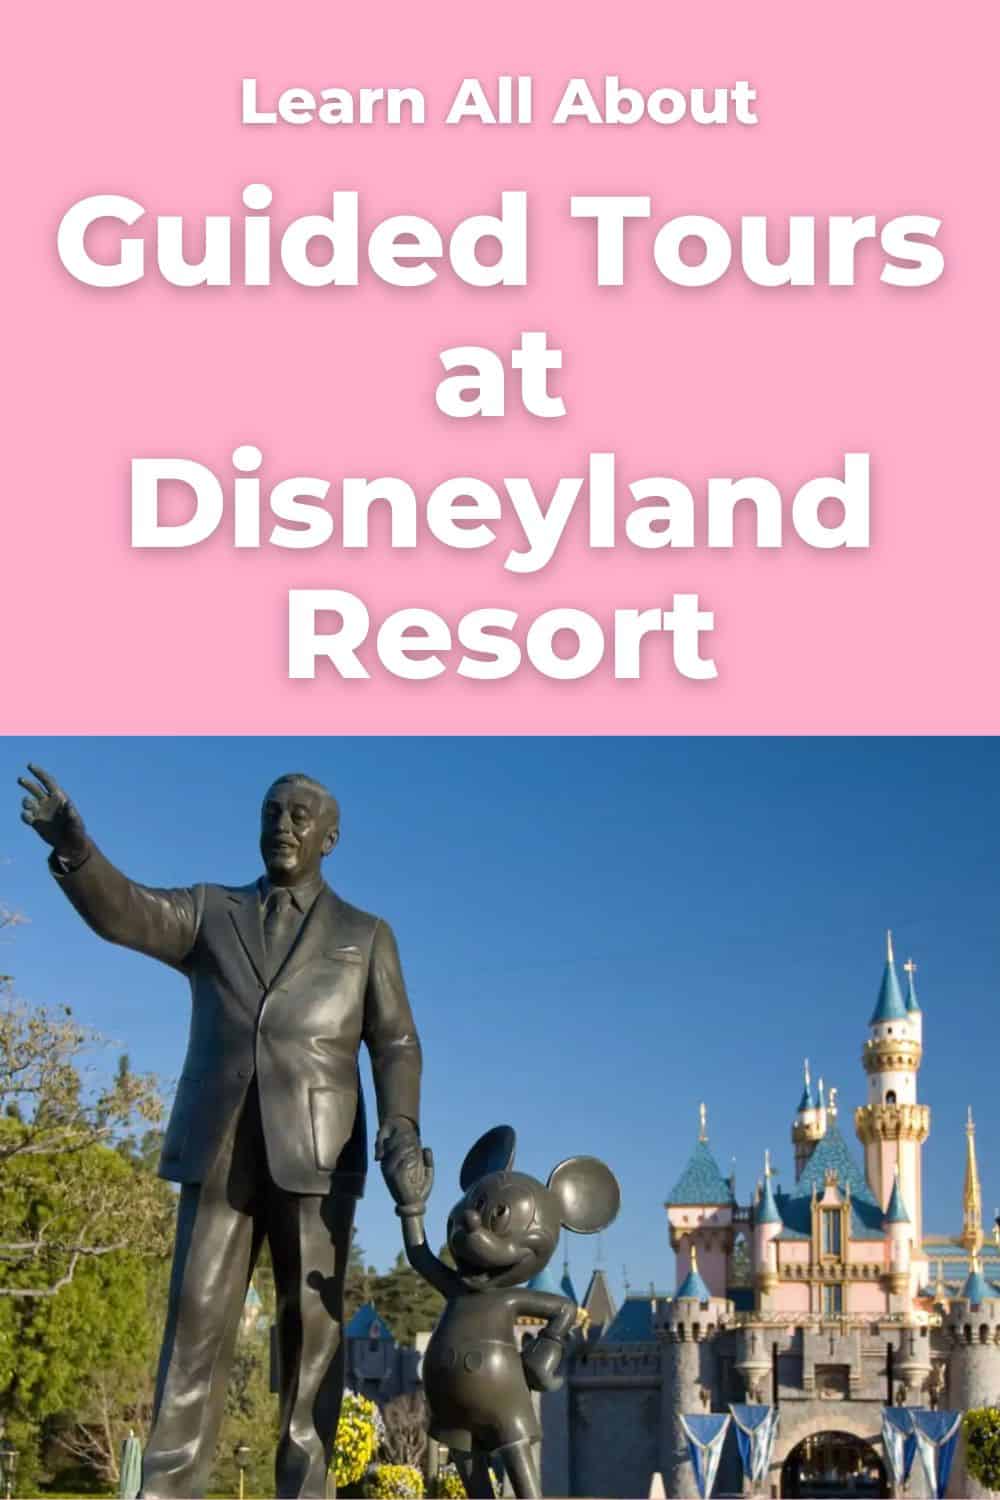 Partners Statue with Sleeping Beauty Castle in the background, with light pink background and text overlay that reads "Learn all about guided tours at Disneyland Resort."